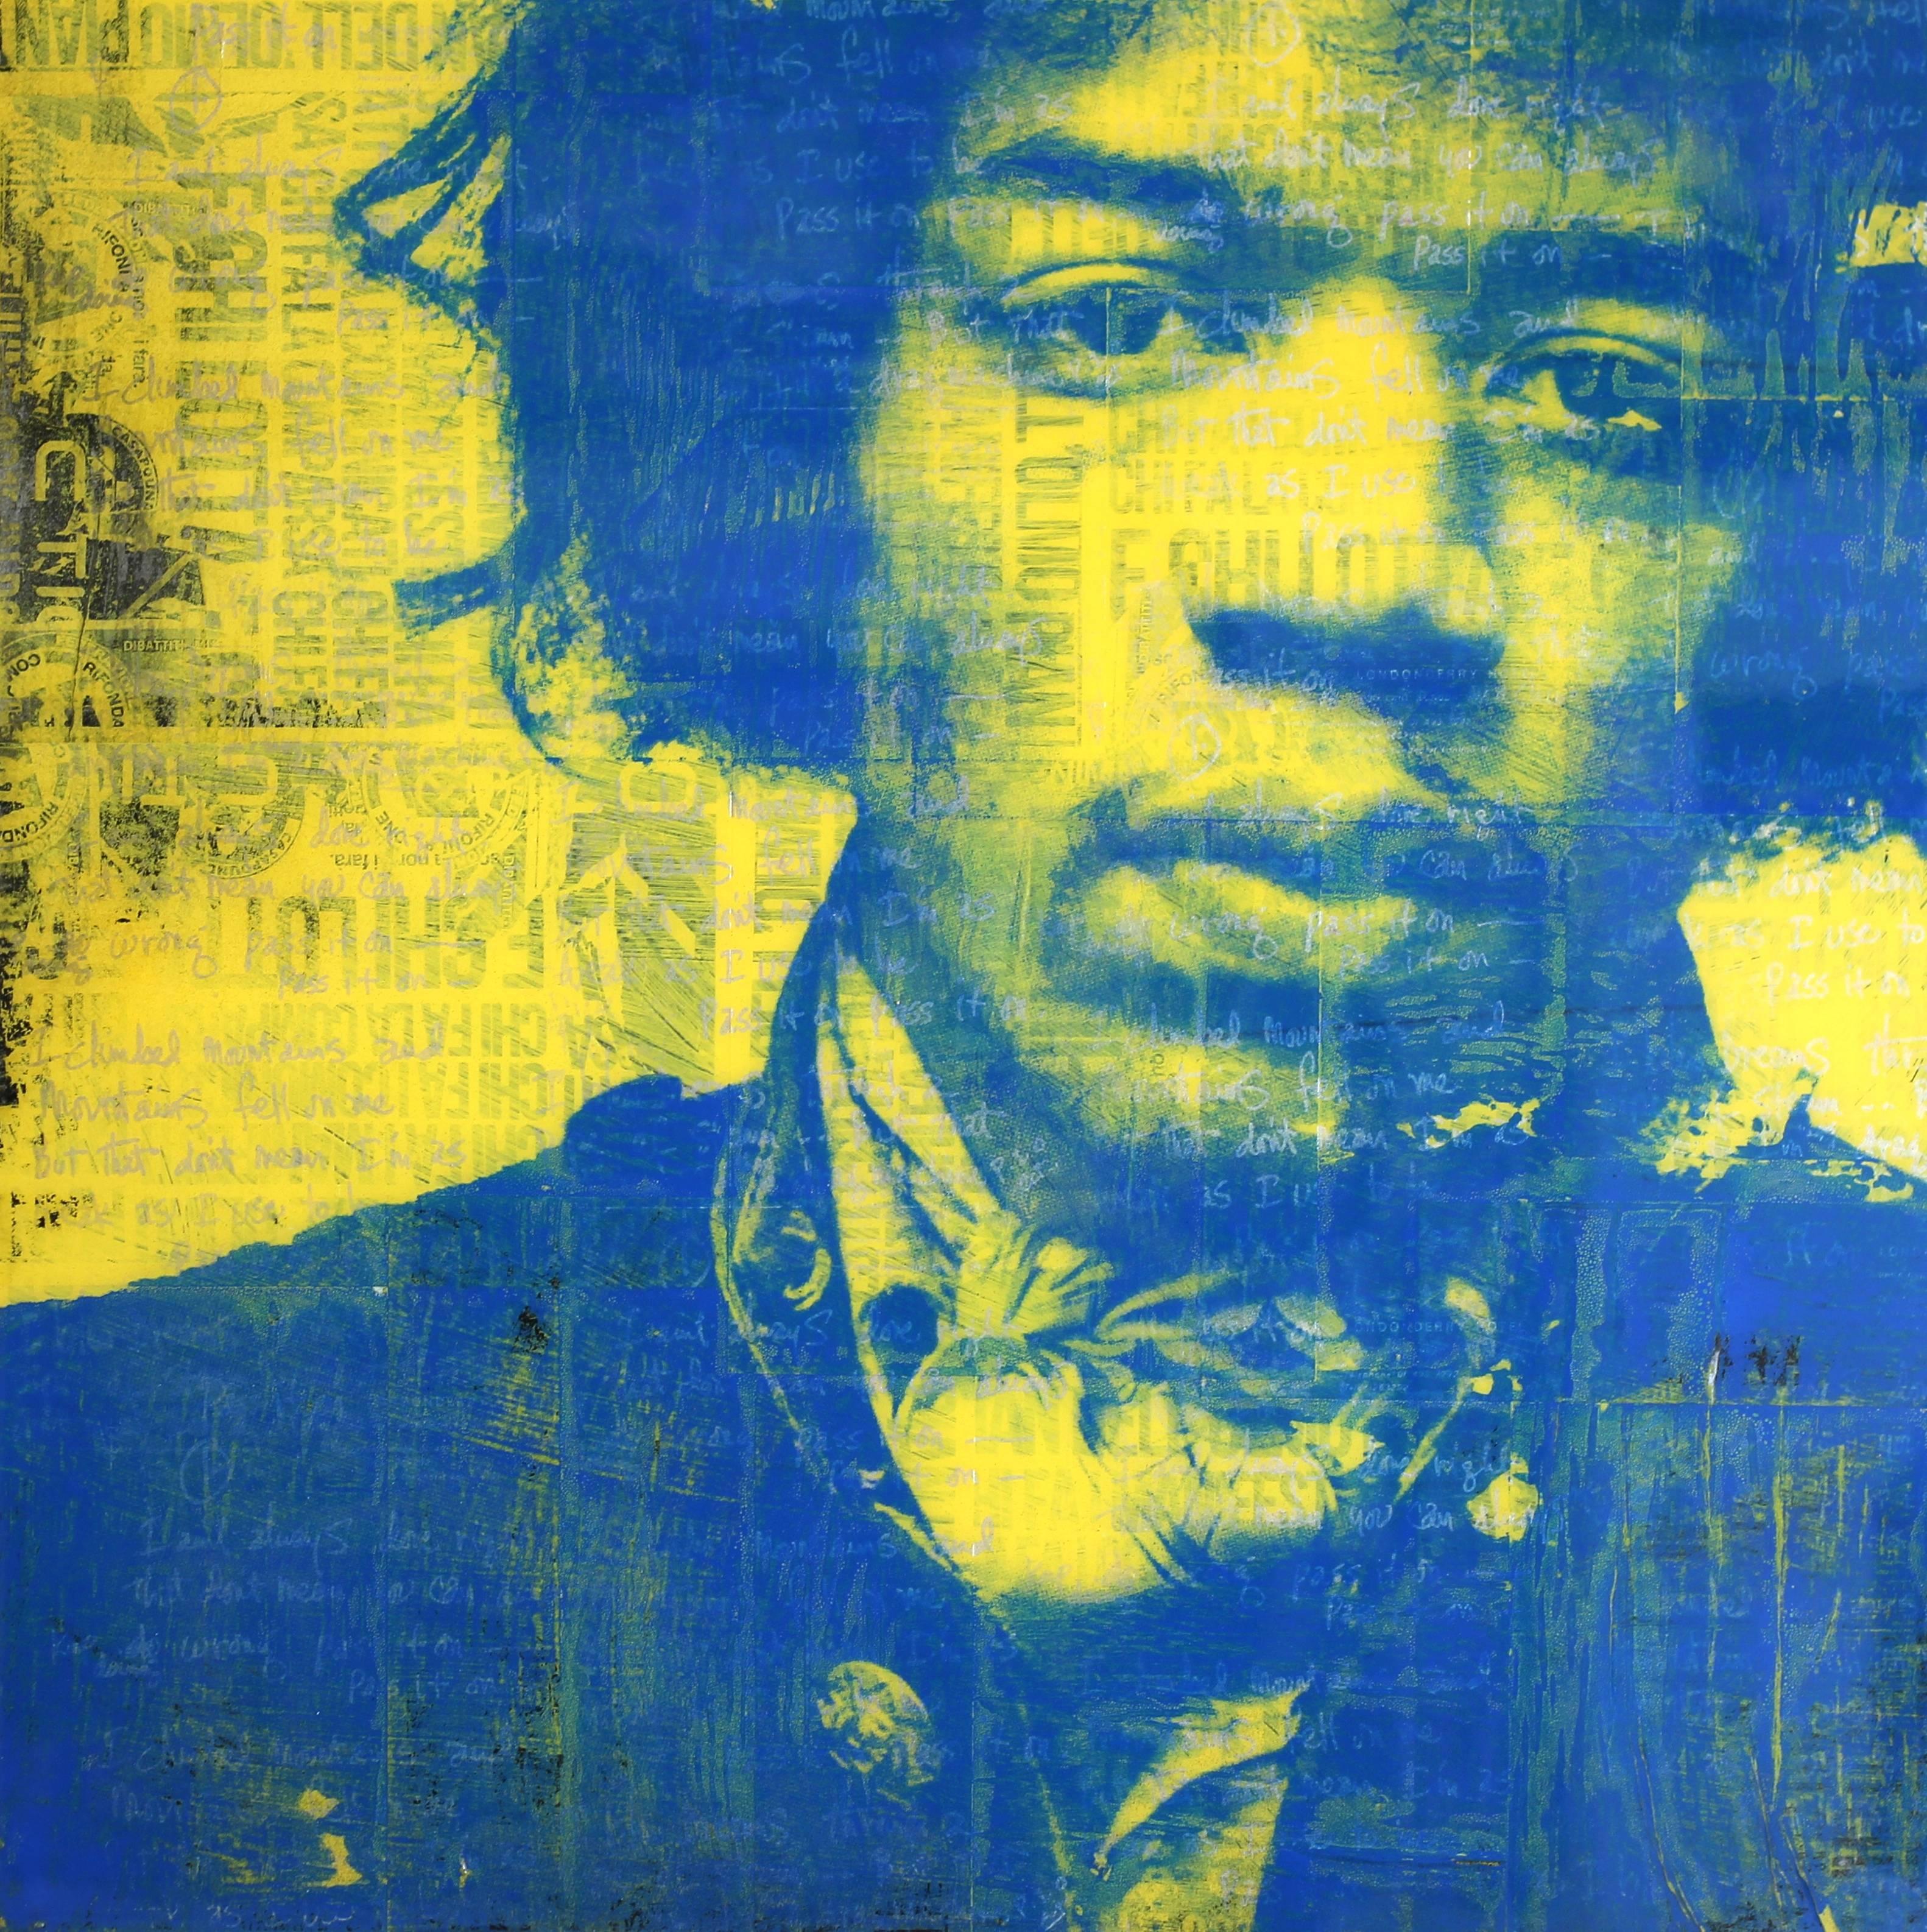 Jimi was a Rockstar Yellow - Street Art Painting by Ashleigh Sumner